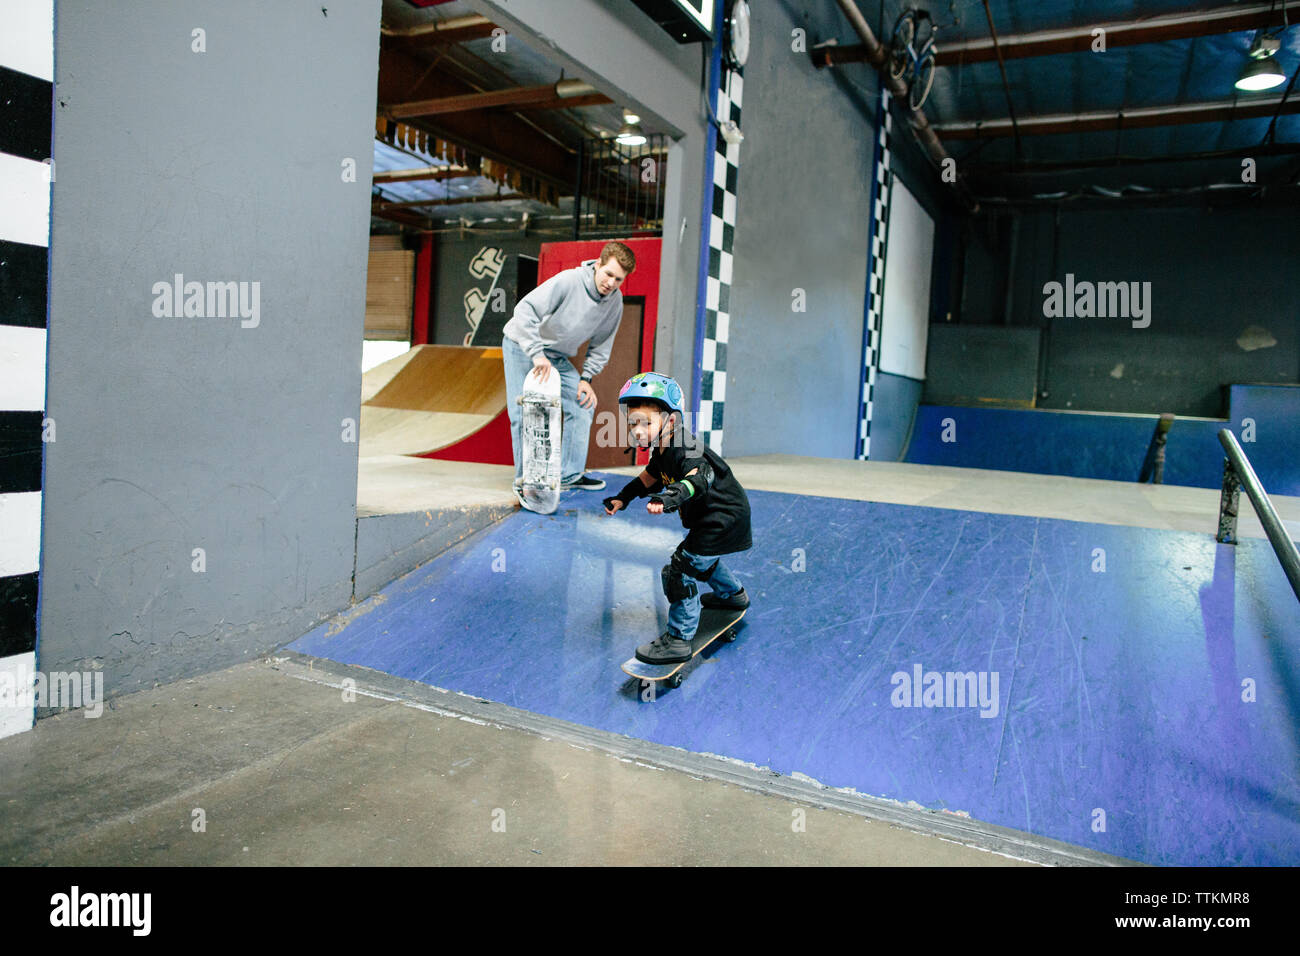 Little boy skates down a ramp while instructor stands behind to watch Stock Photo